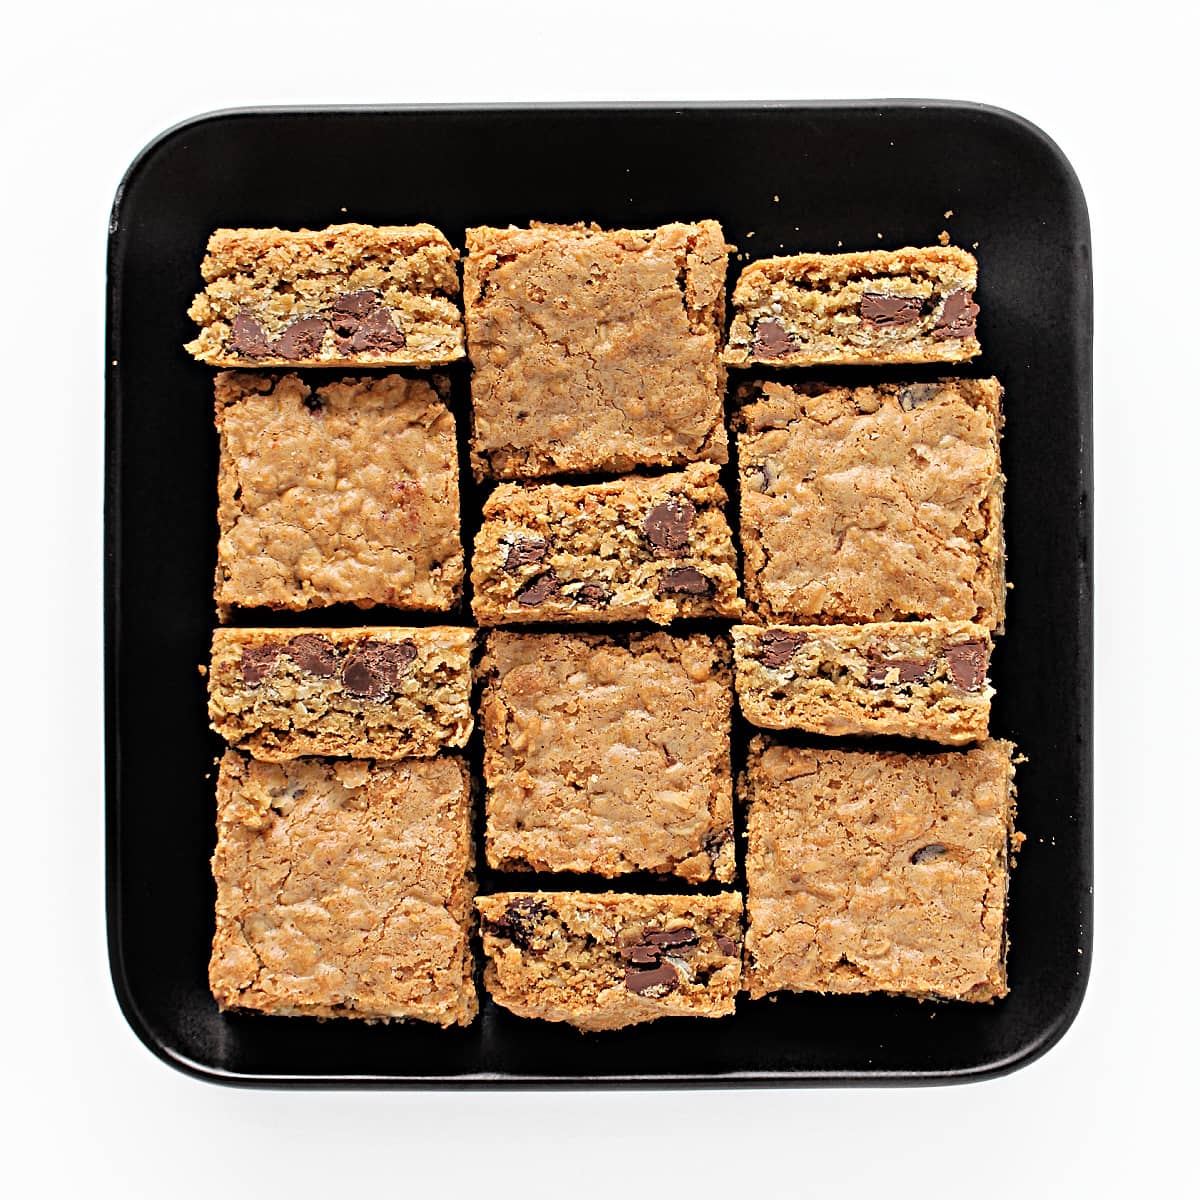 Cut squares of Chocolate Chip Oatmeal Bars on a square serving plate.